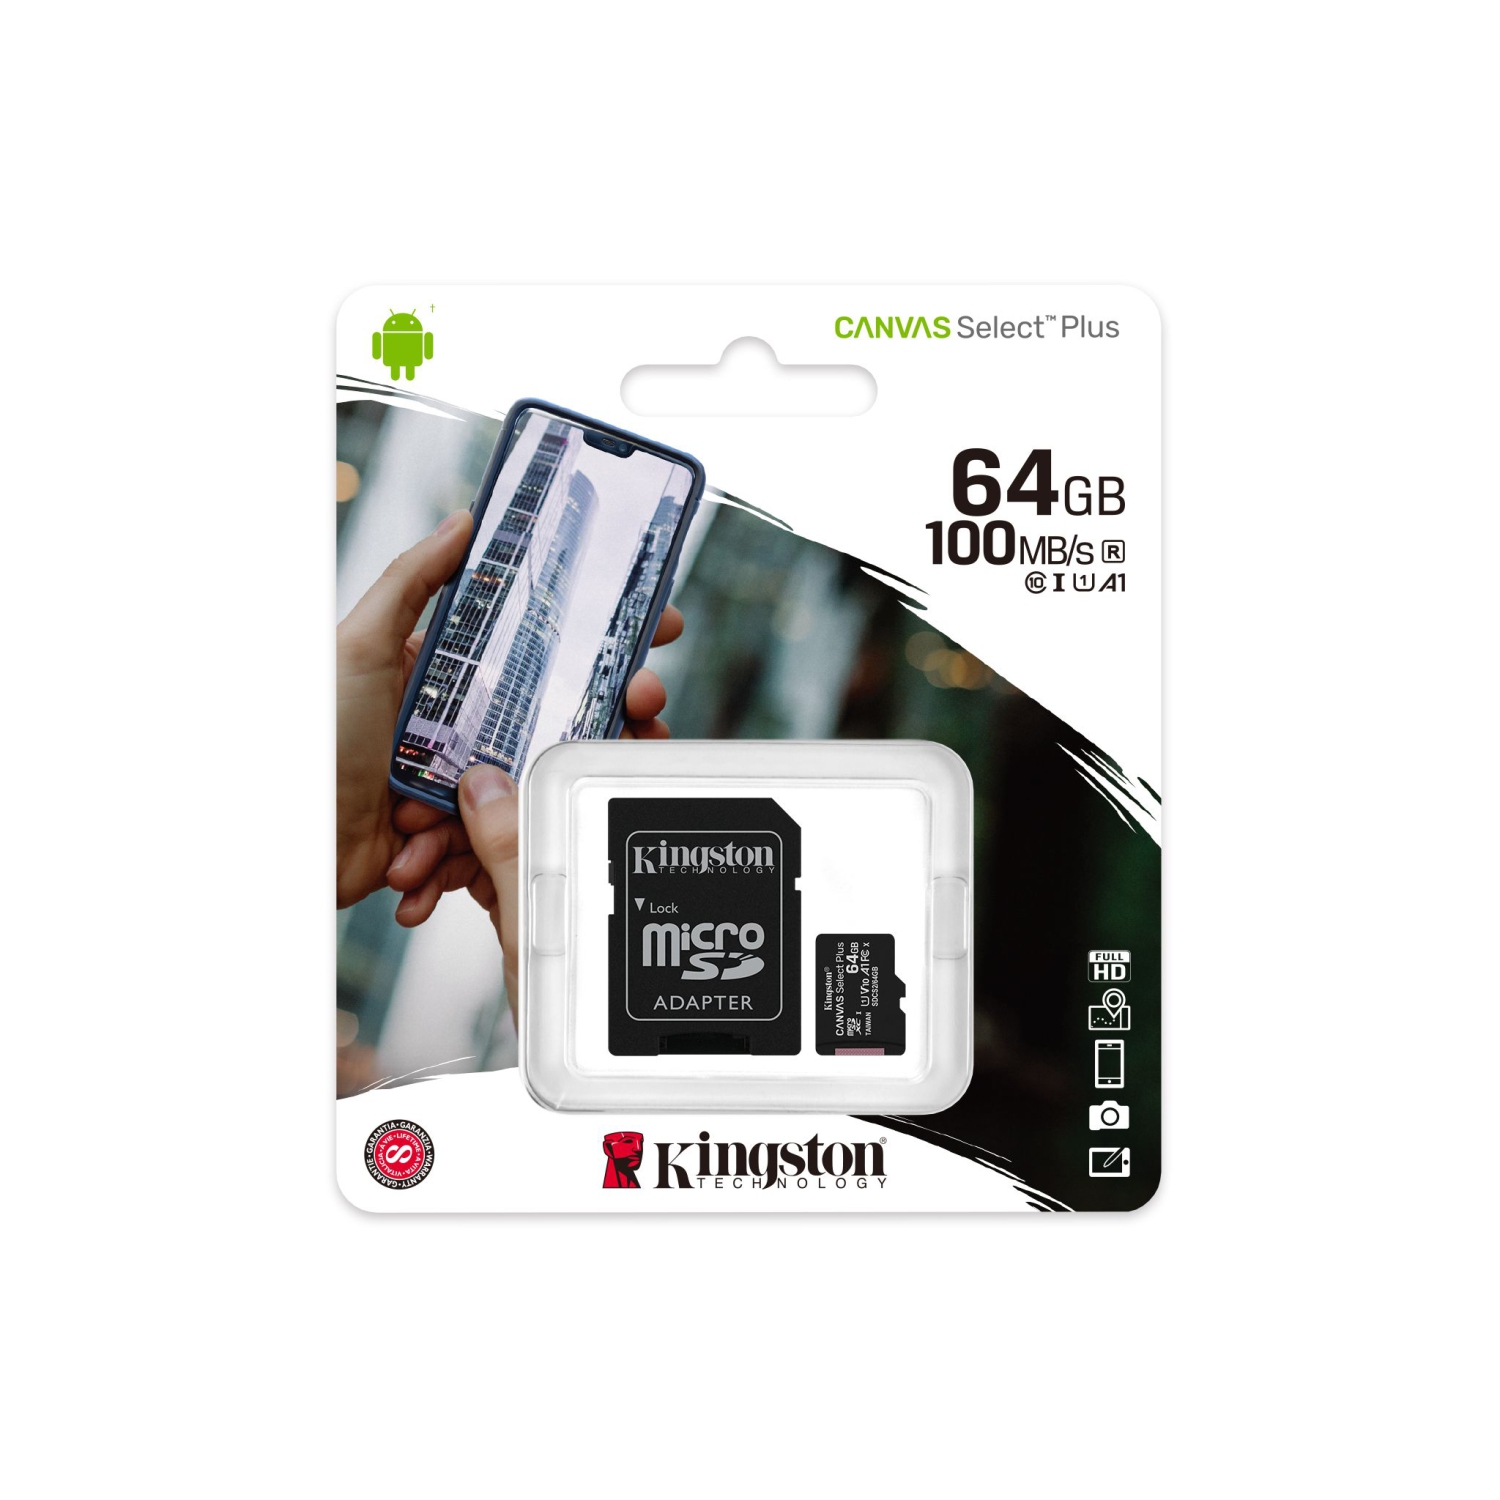 Kingston Canvas Select Plus microSDXC 64GB Class 10 UHS-I Memory Card (With Adapter)